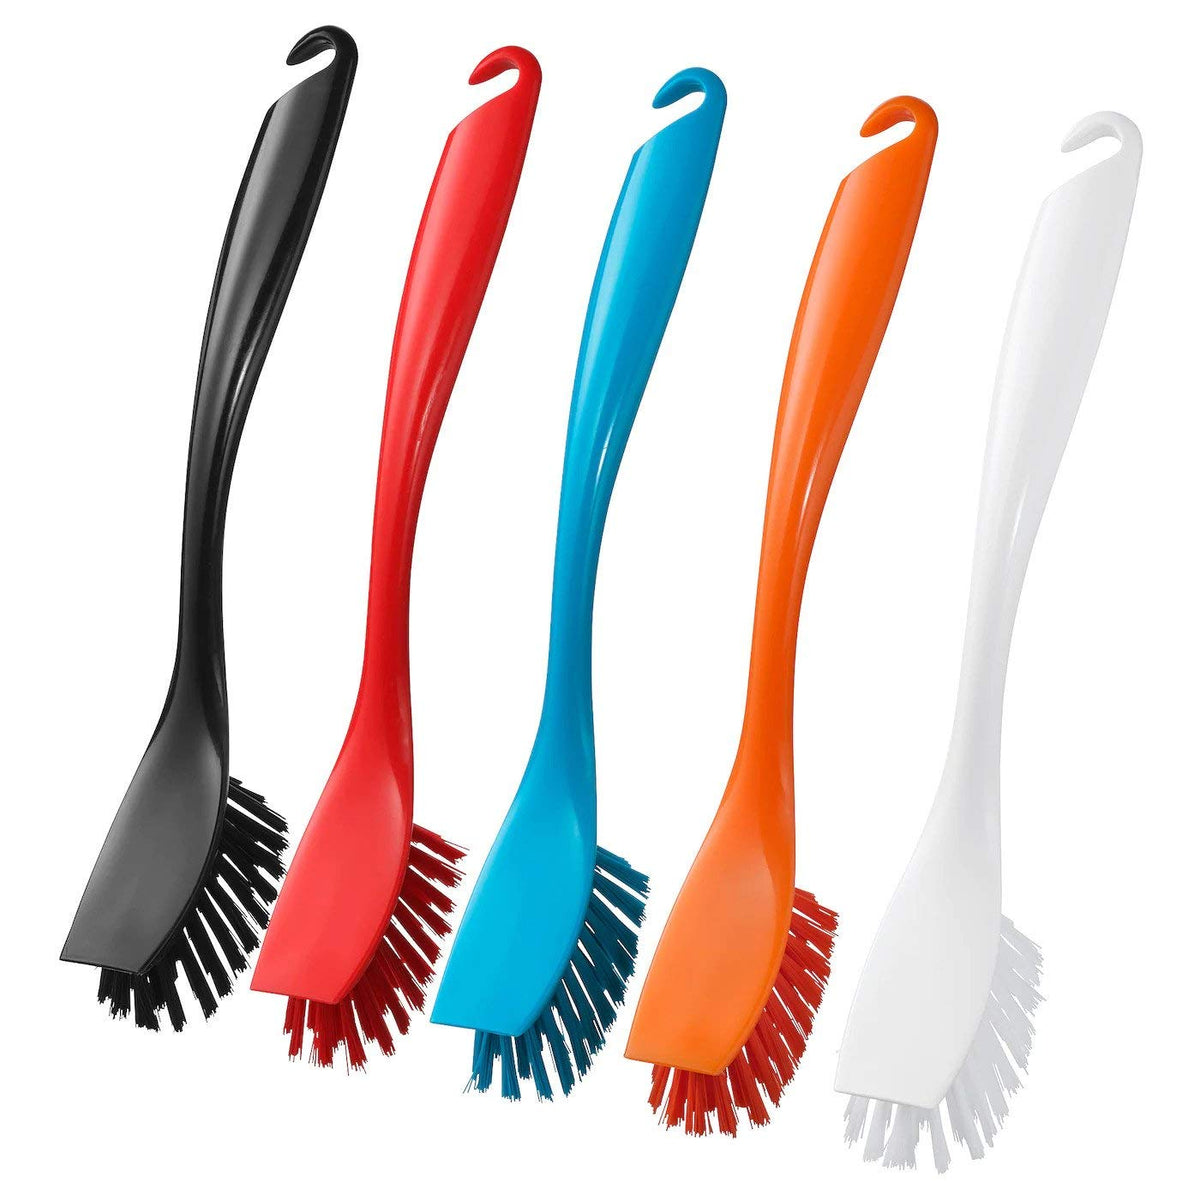 IKEA ANTAGEN Dish-Washing Brush, Assorted-Colours (5 Pieces)